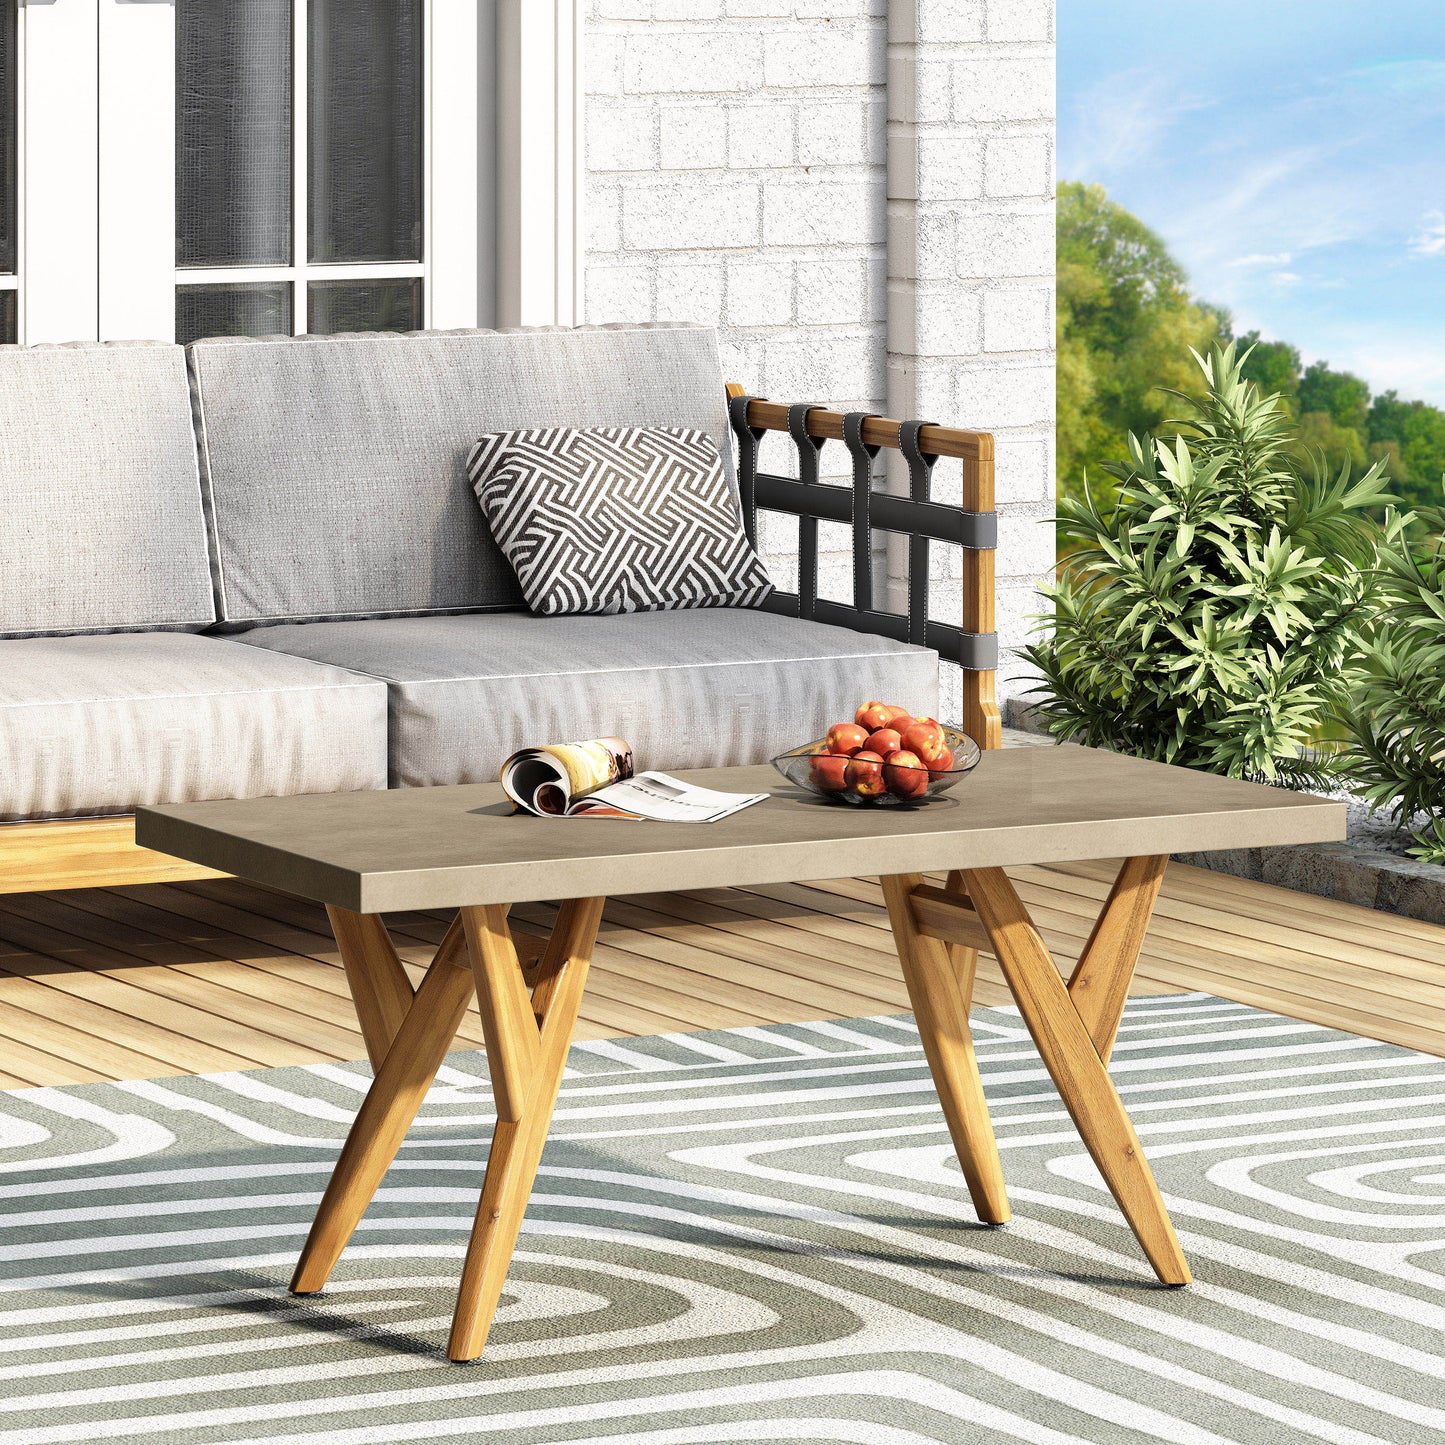 Loverin Outdoor Acacia Wood and Cast Stone Coffee Table, Teak and Light Gray